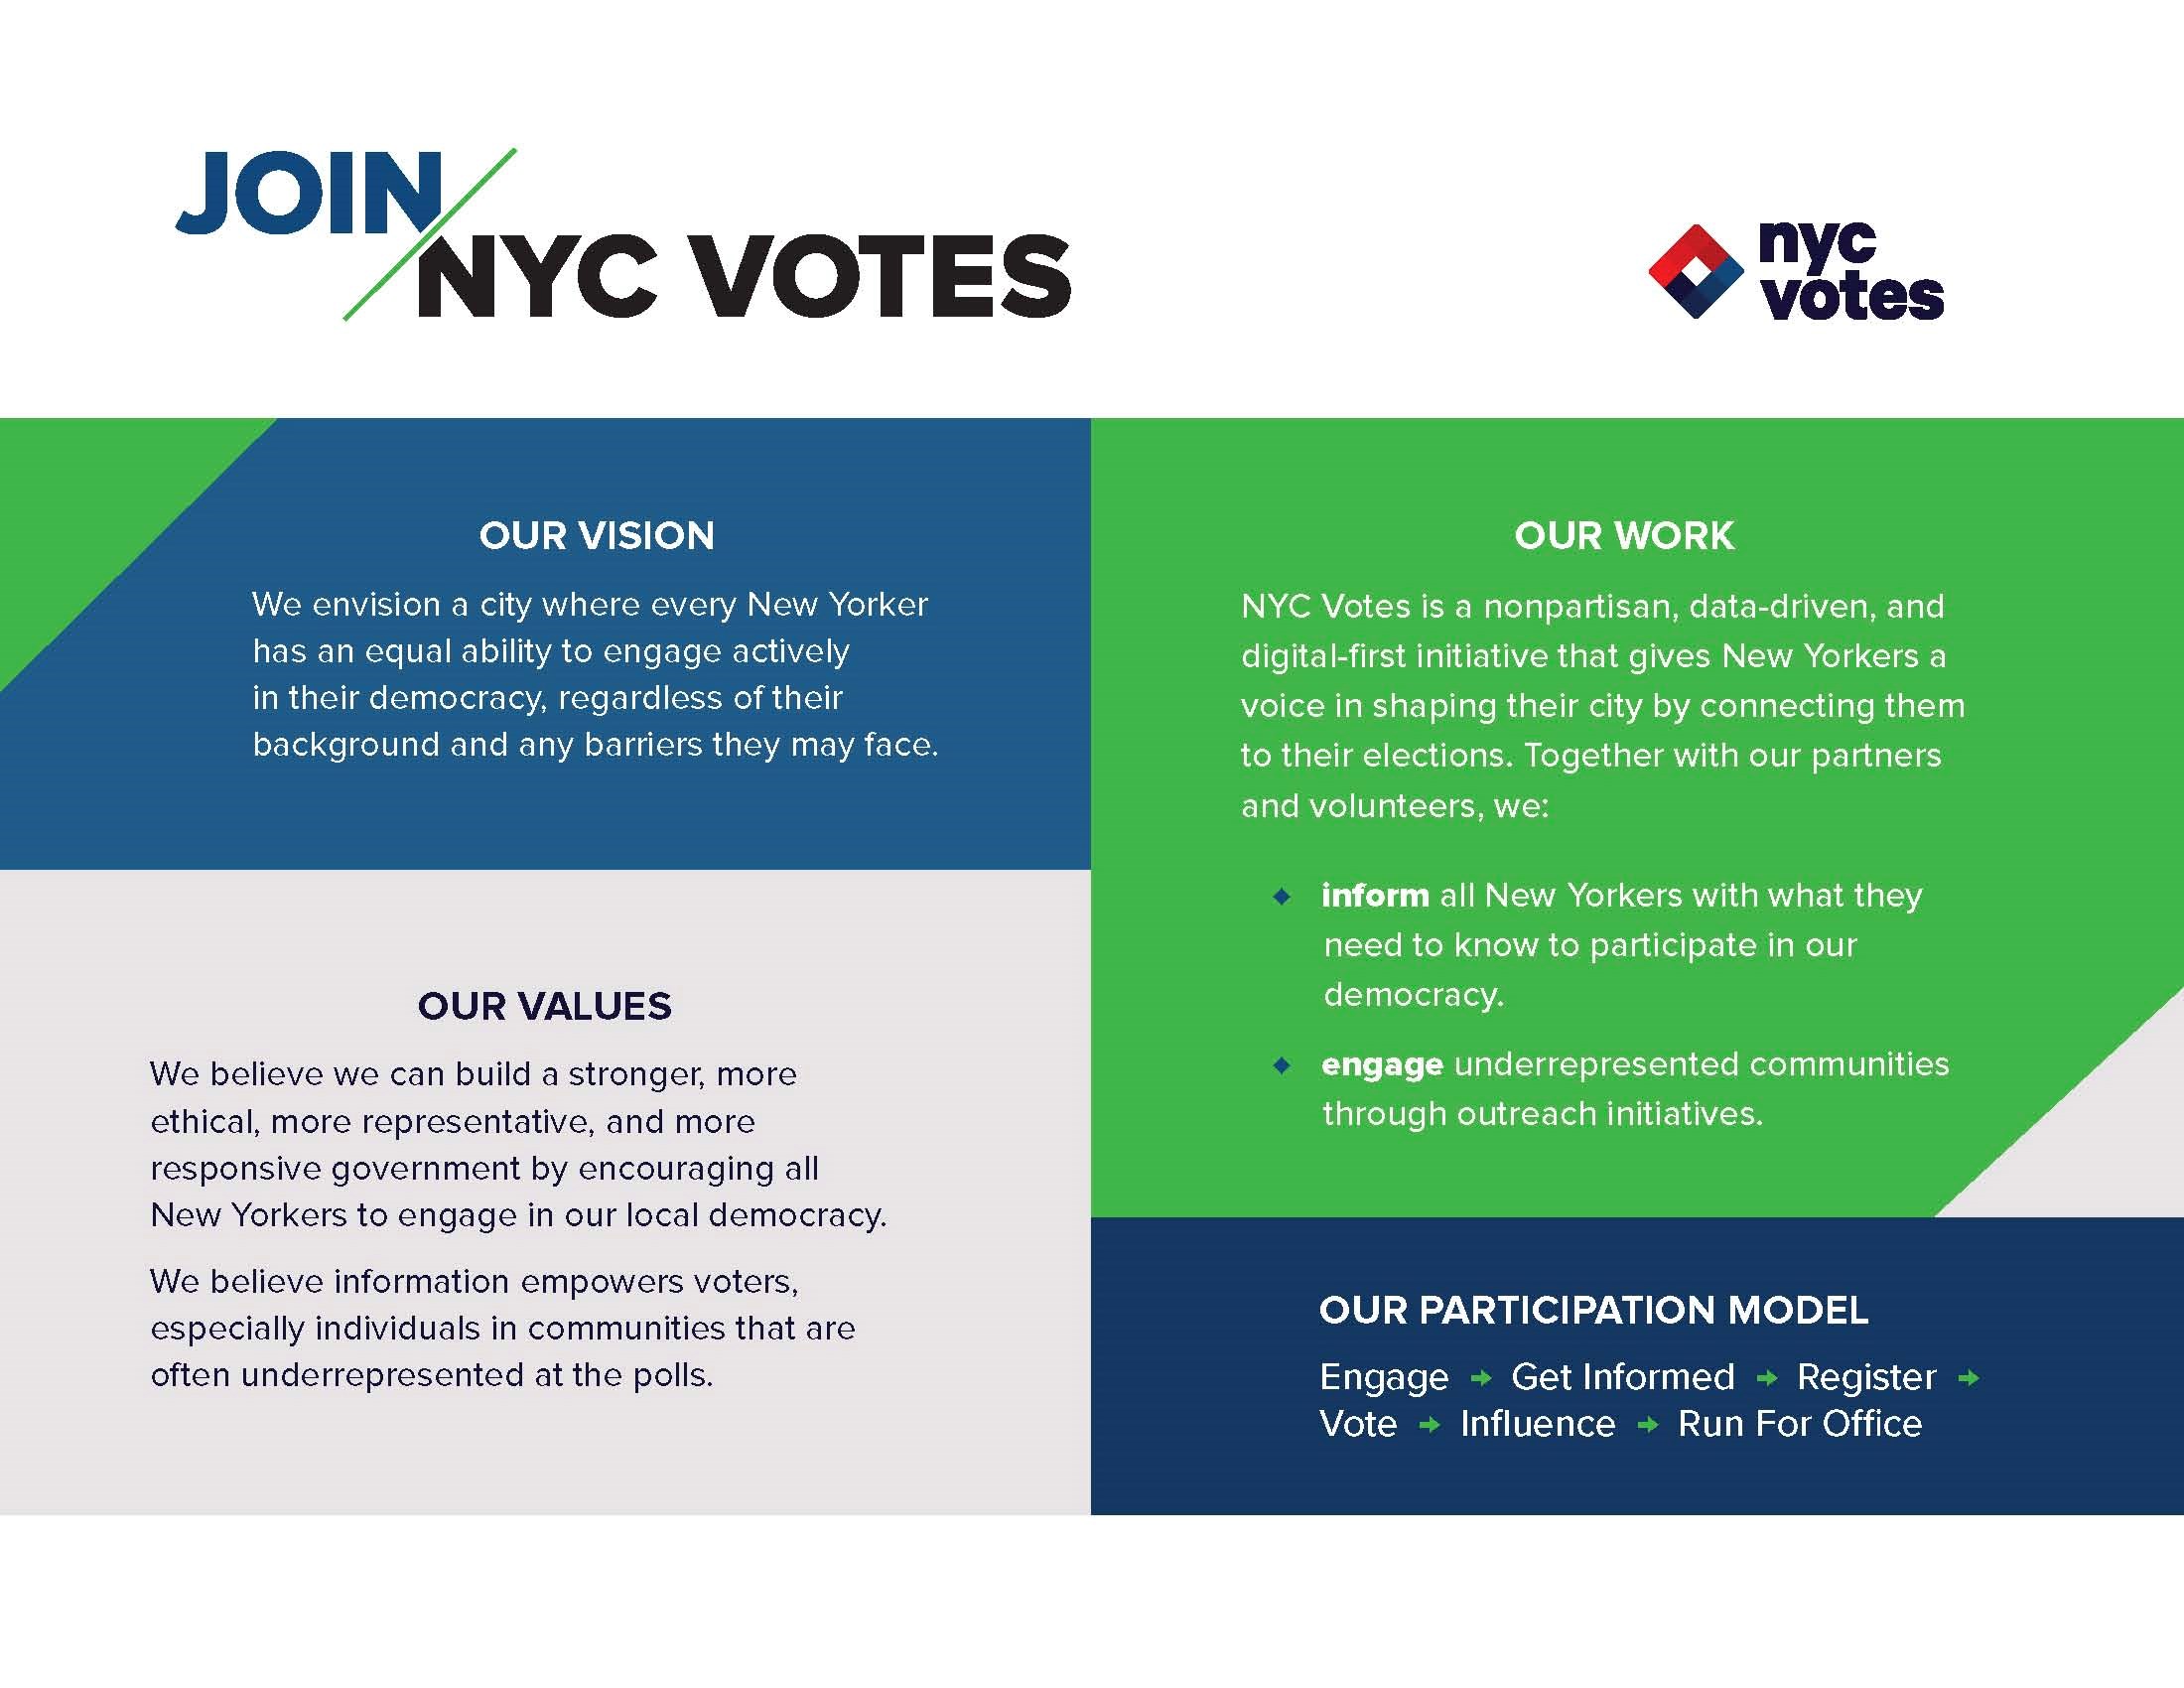 About NYC Votes